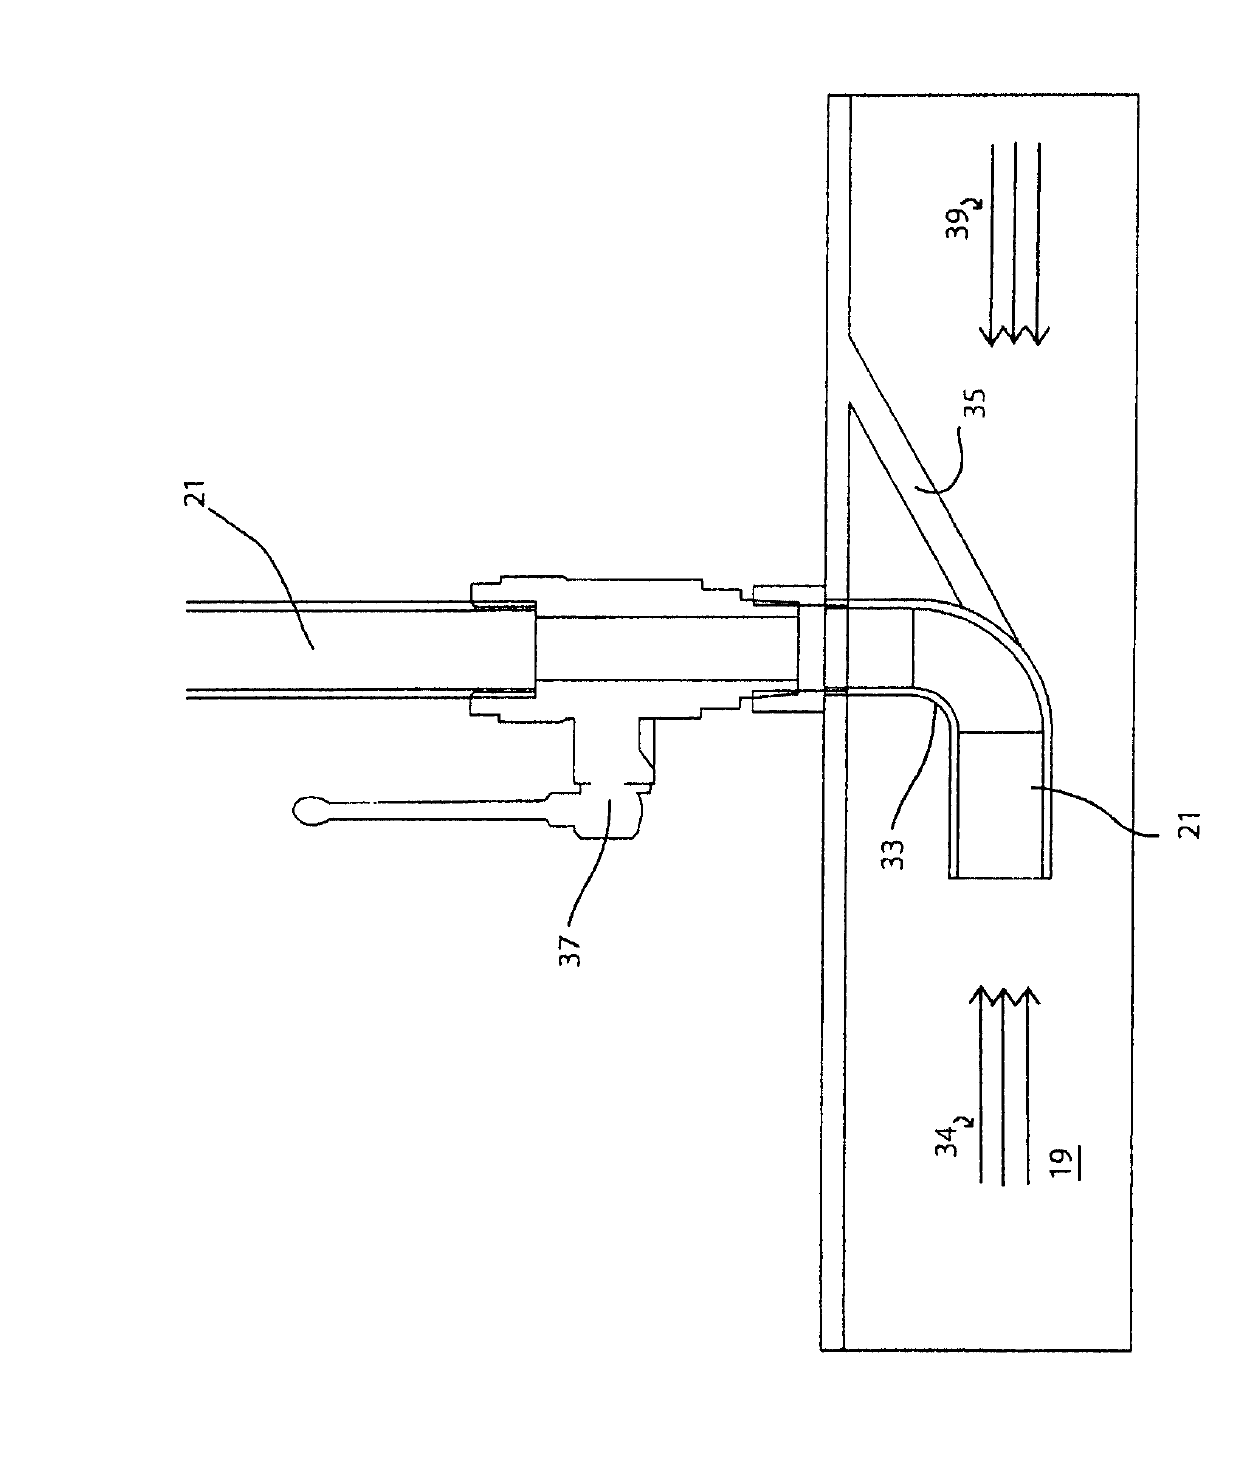 Pressure equalising device for systems through which fluid flows